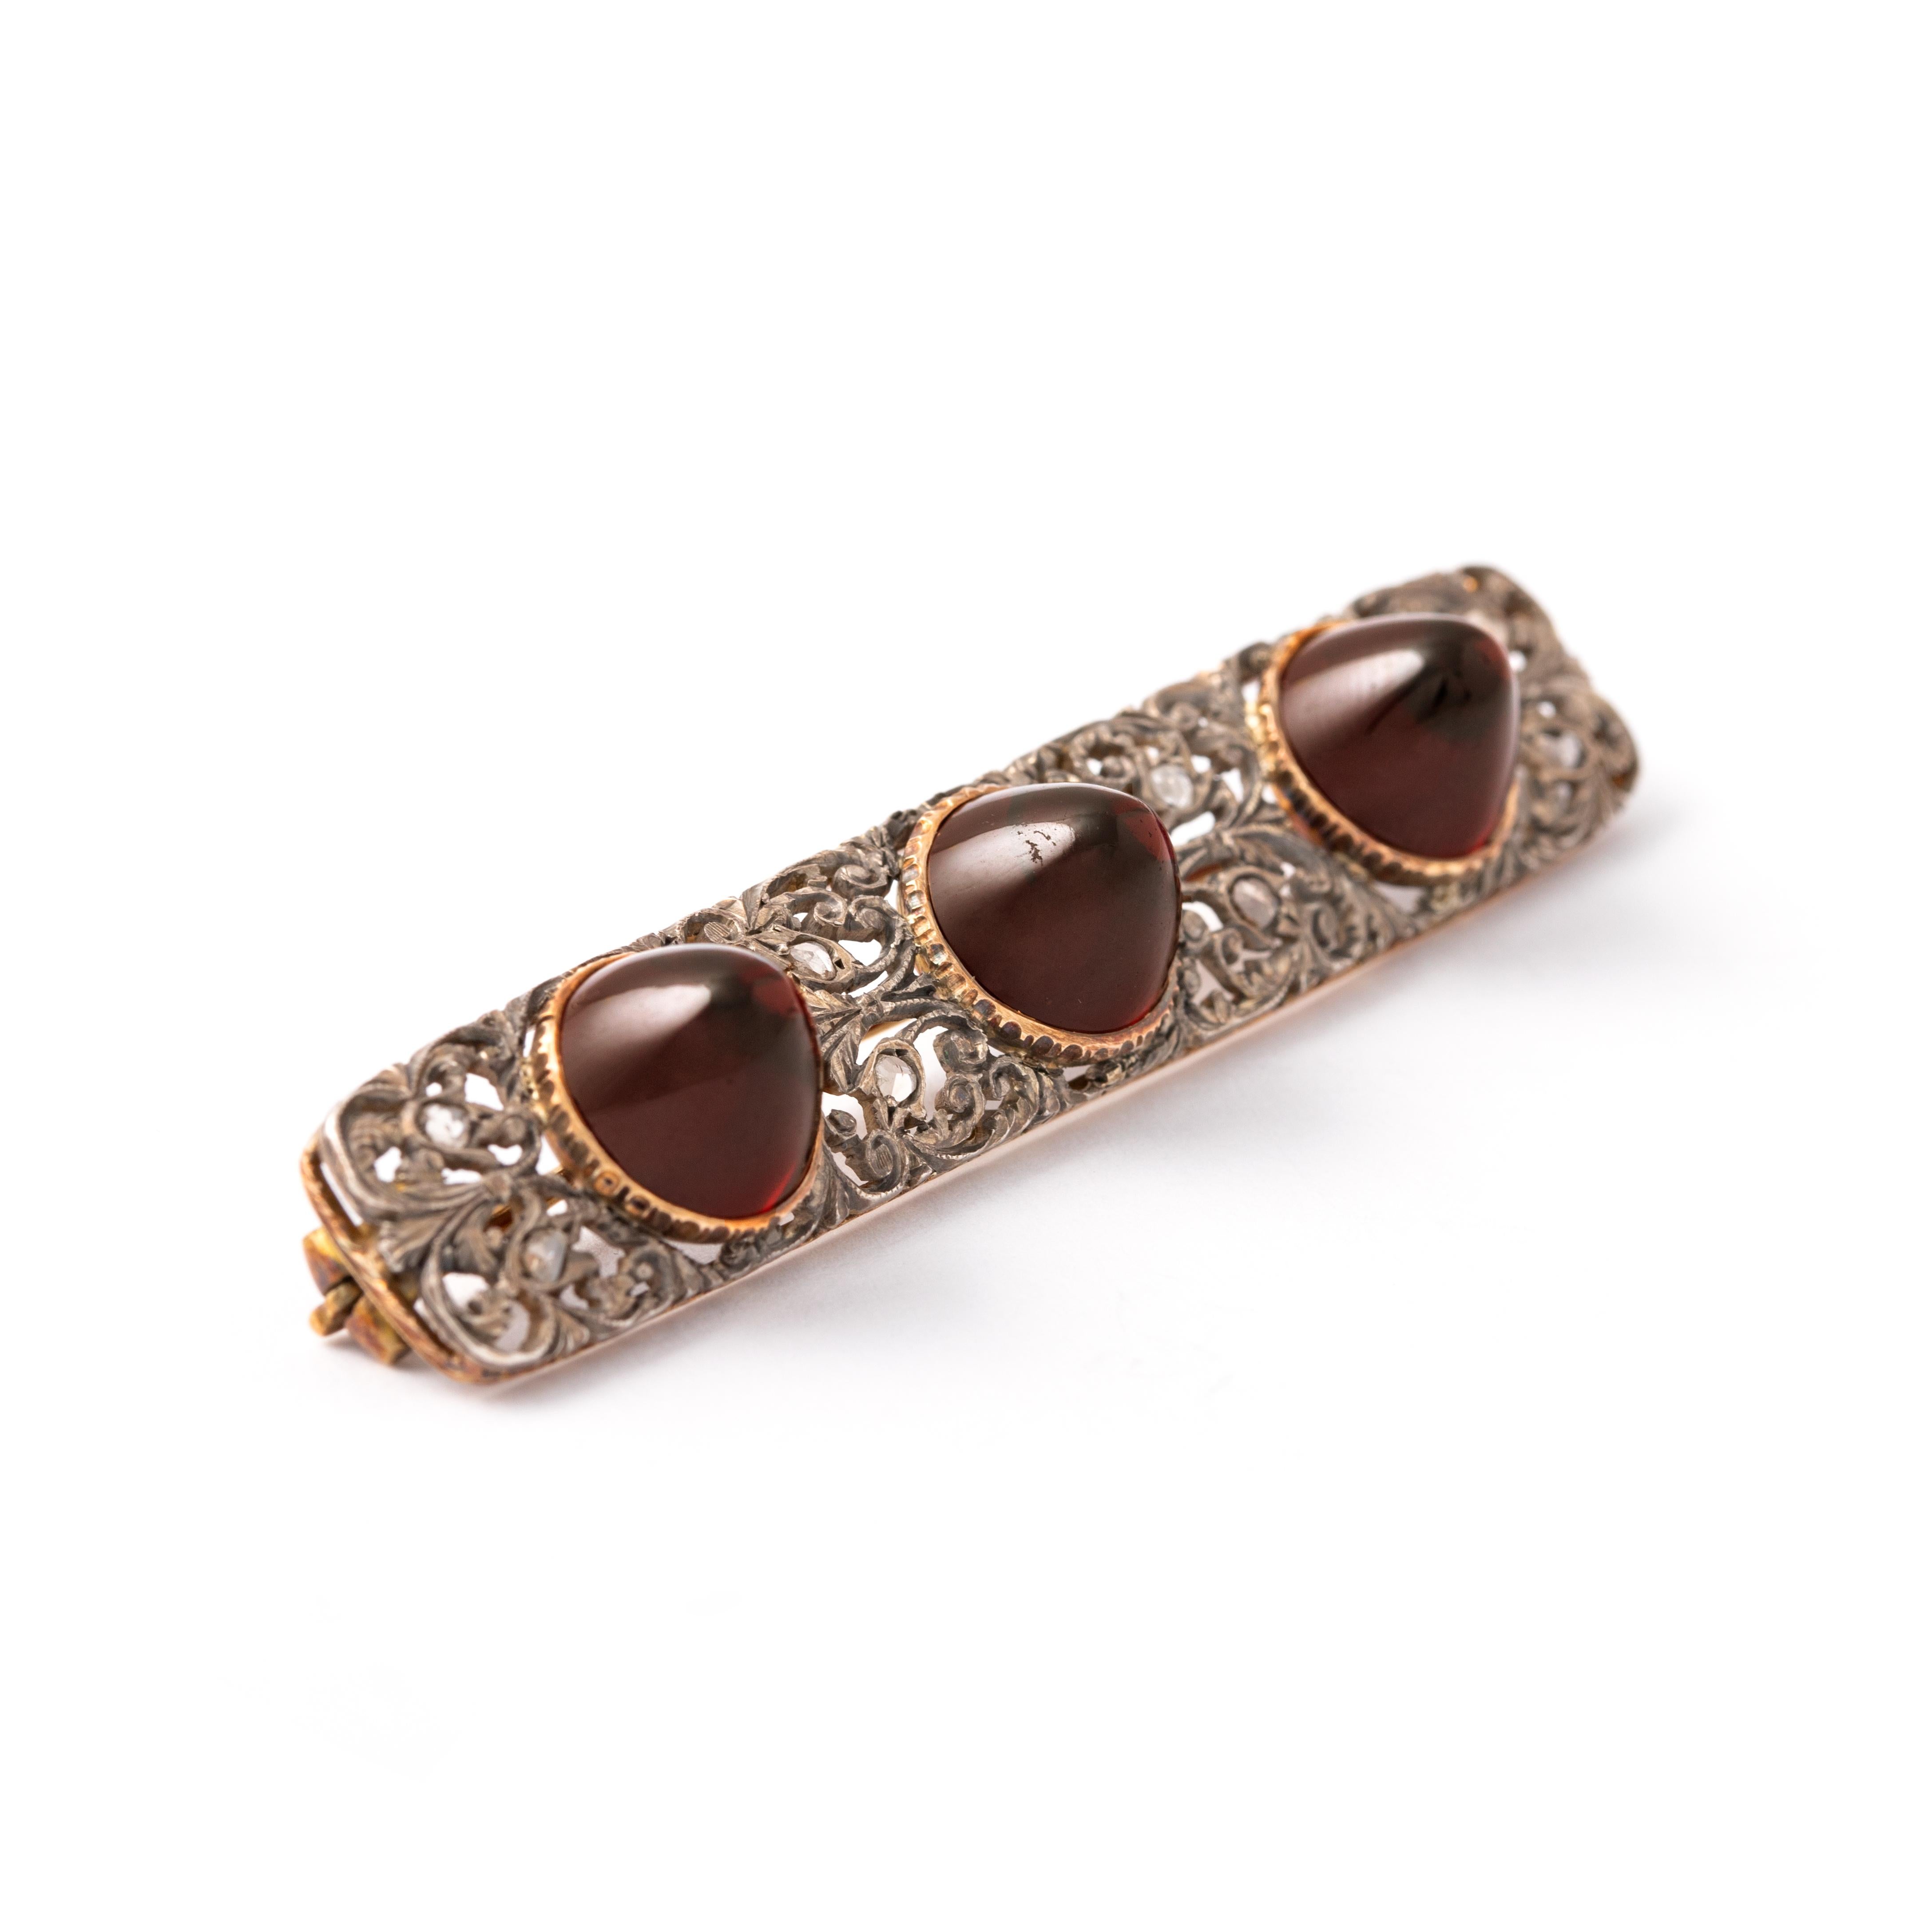 Antique Garnet Cabochon Gold Brooch.
Early 20th Century.

Total length: approx. 6.70 centimeters / 2.64 inches.
Total width: approx. 1.25 centimeters / 0.49 inches.

Total weight: 12.92 grams.
